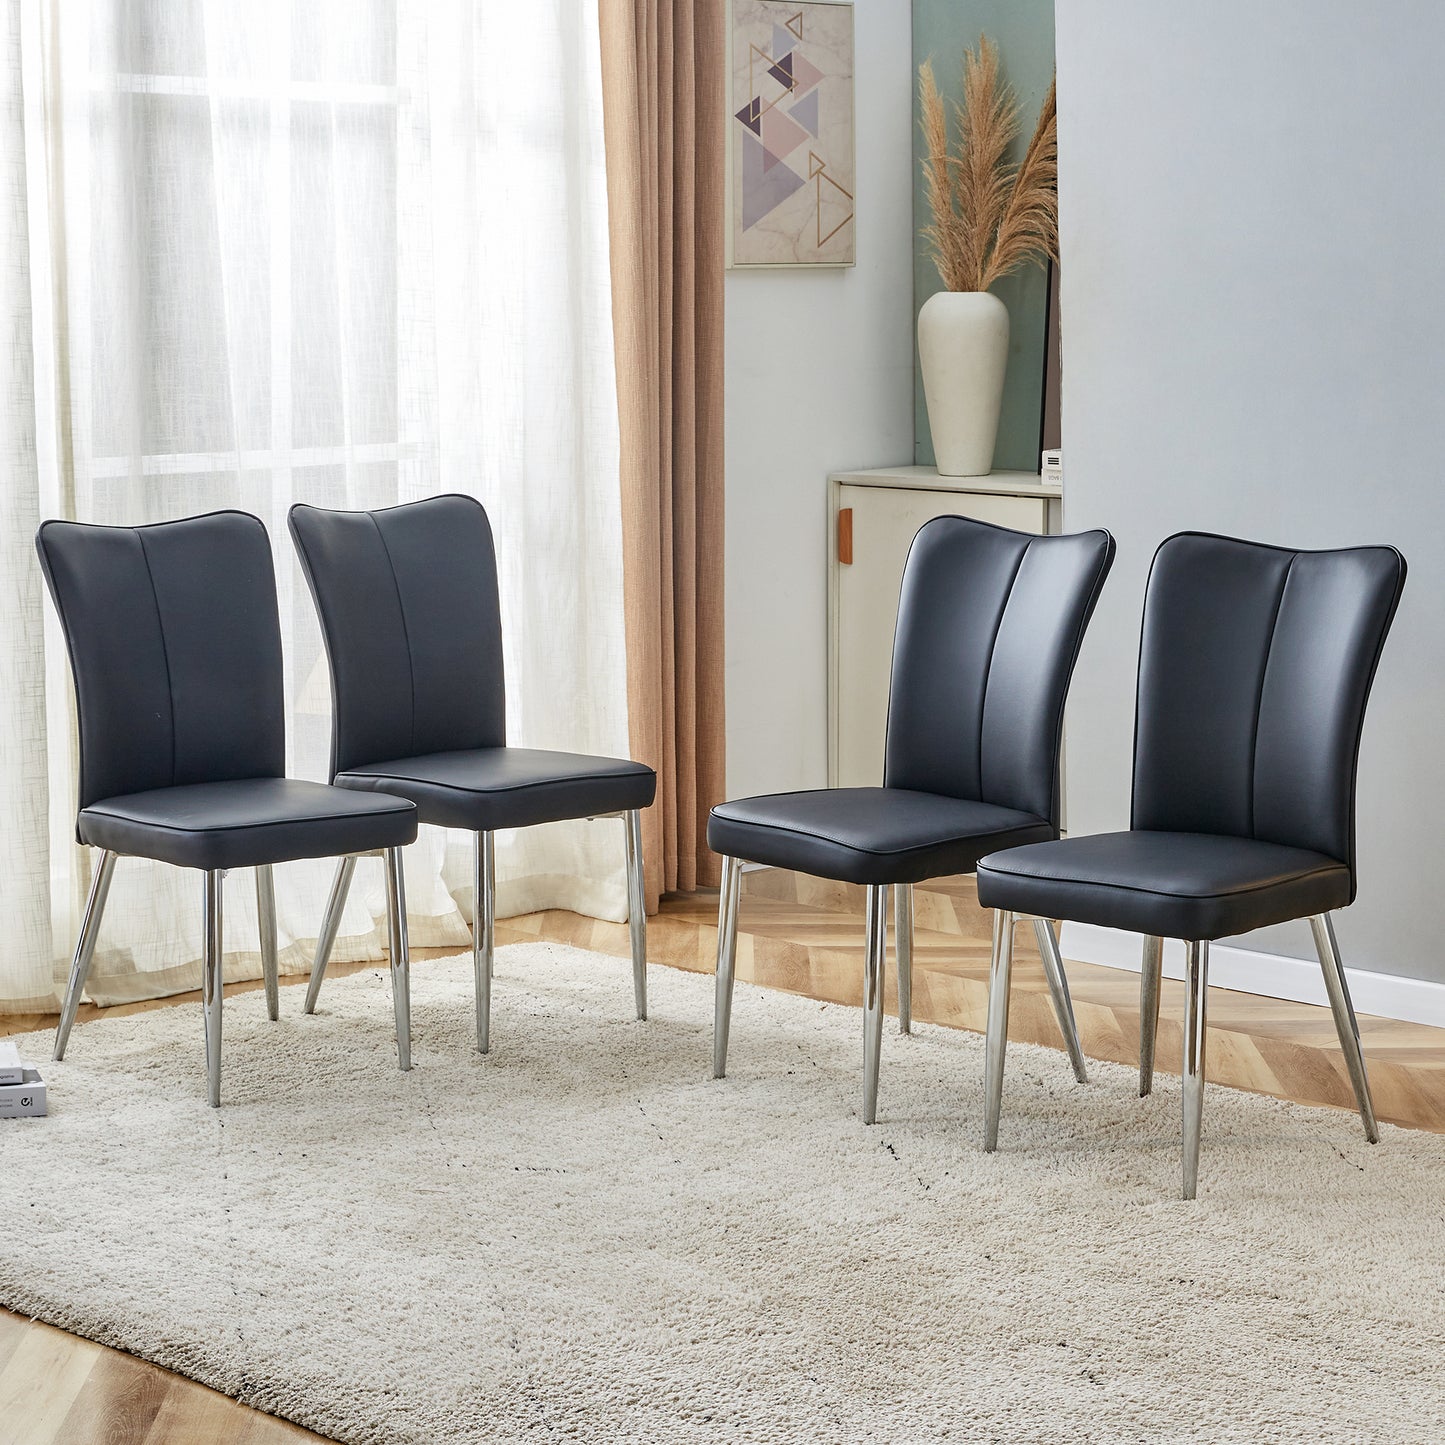 Phelps Modern minimalist dining chairs in Black. (Set of 4)